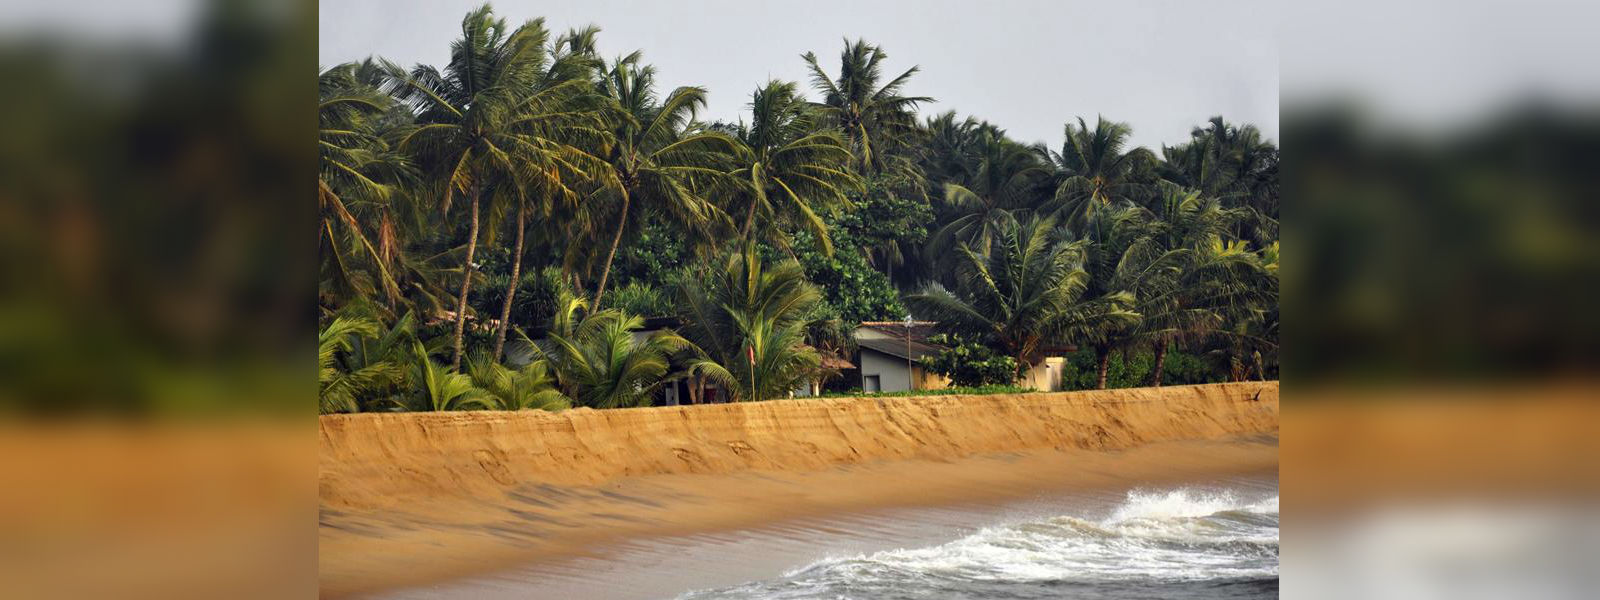 Environmentalists concerened over beach nourishment projects